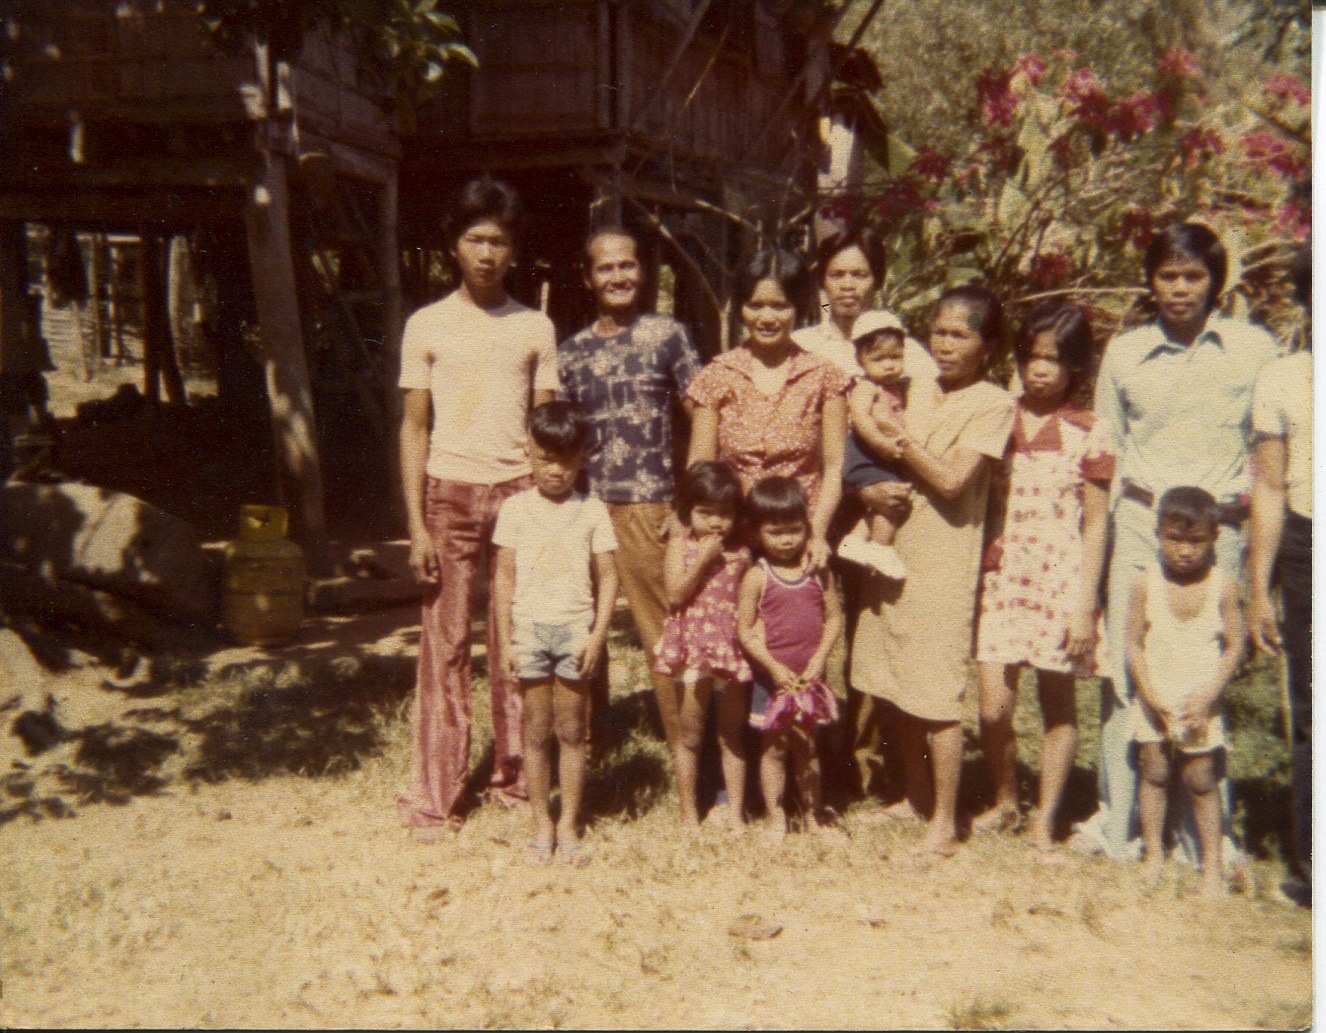 Photo of Carnate's family, unkownUnknown date, from own photo collection. Taken at childhood home in Tangcarang. Left to right back row: neighbor, uncle Epifanio Domingo, sister Milagros Carnate, neighbor, brother Jesus Carnate, brother in law Generoso Cadiente (married to Milagros)Front row: unknown, Genalyn and Joelle (daughters of Milagros and Generoso,) unknown children (nieces.) Any views, findings, conclusions, or recommendations expressed in this story do not necessarily represent those of the National Endowment for the Humanities. (c) Field Museum of Natural History - CC BY-NC 4.0